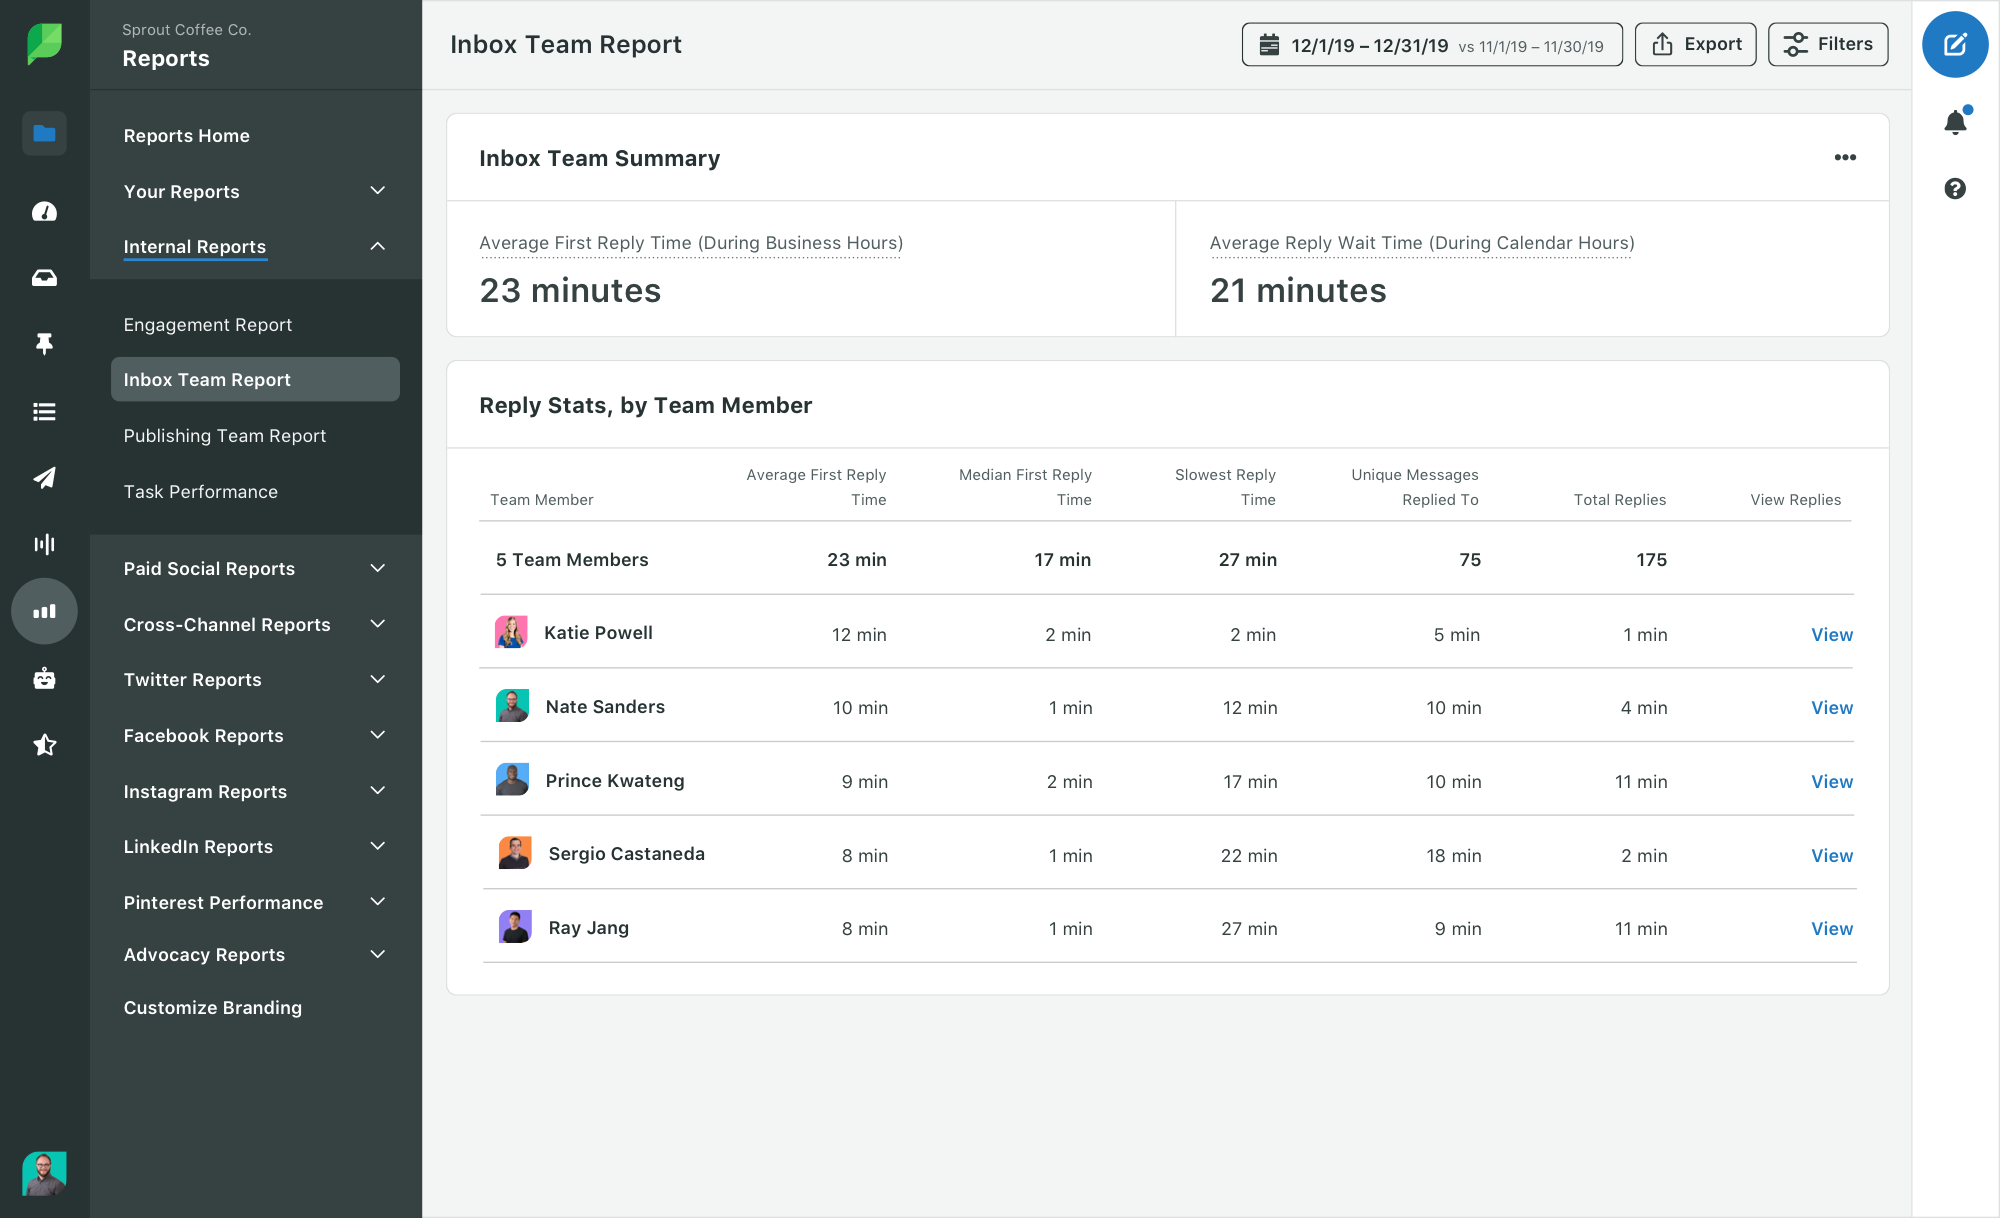 A screenshot of Sprout's Inbox Team Report that displays overall average wait and reply times, as well as social customer service metrics by team member.